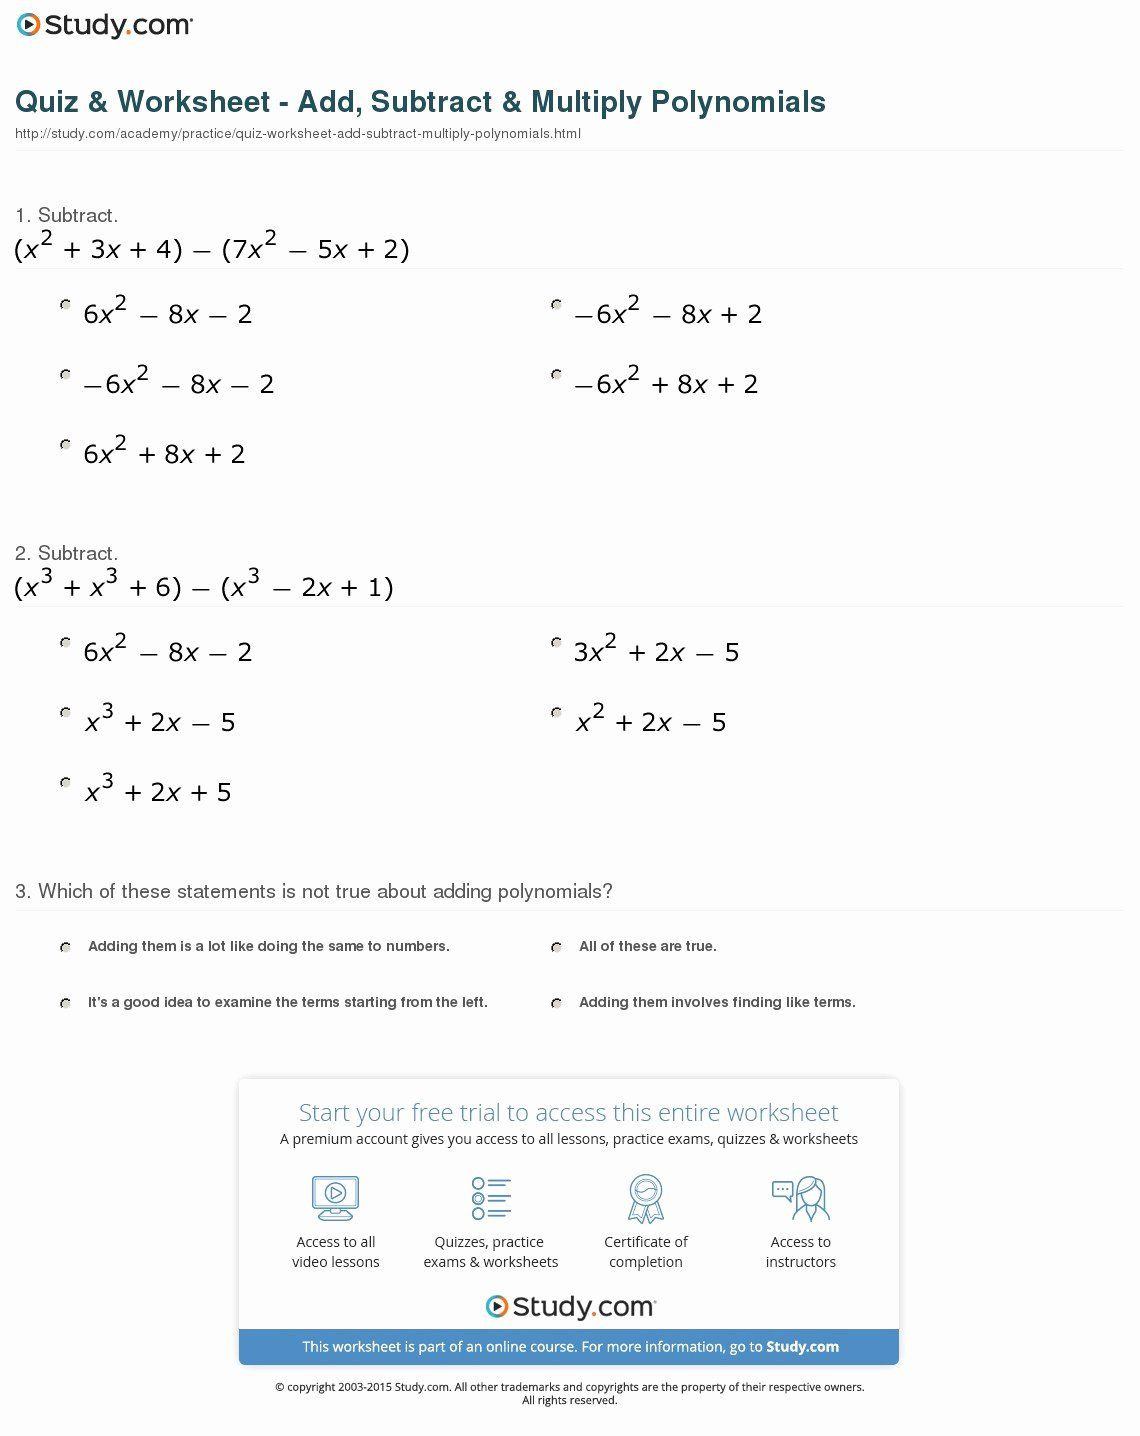 Multiplying Polynomials Worksheet Answers 50 Multiplying Monomials Worksheet Answers In 2020